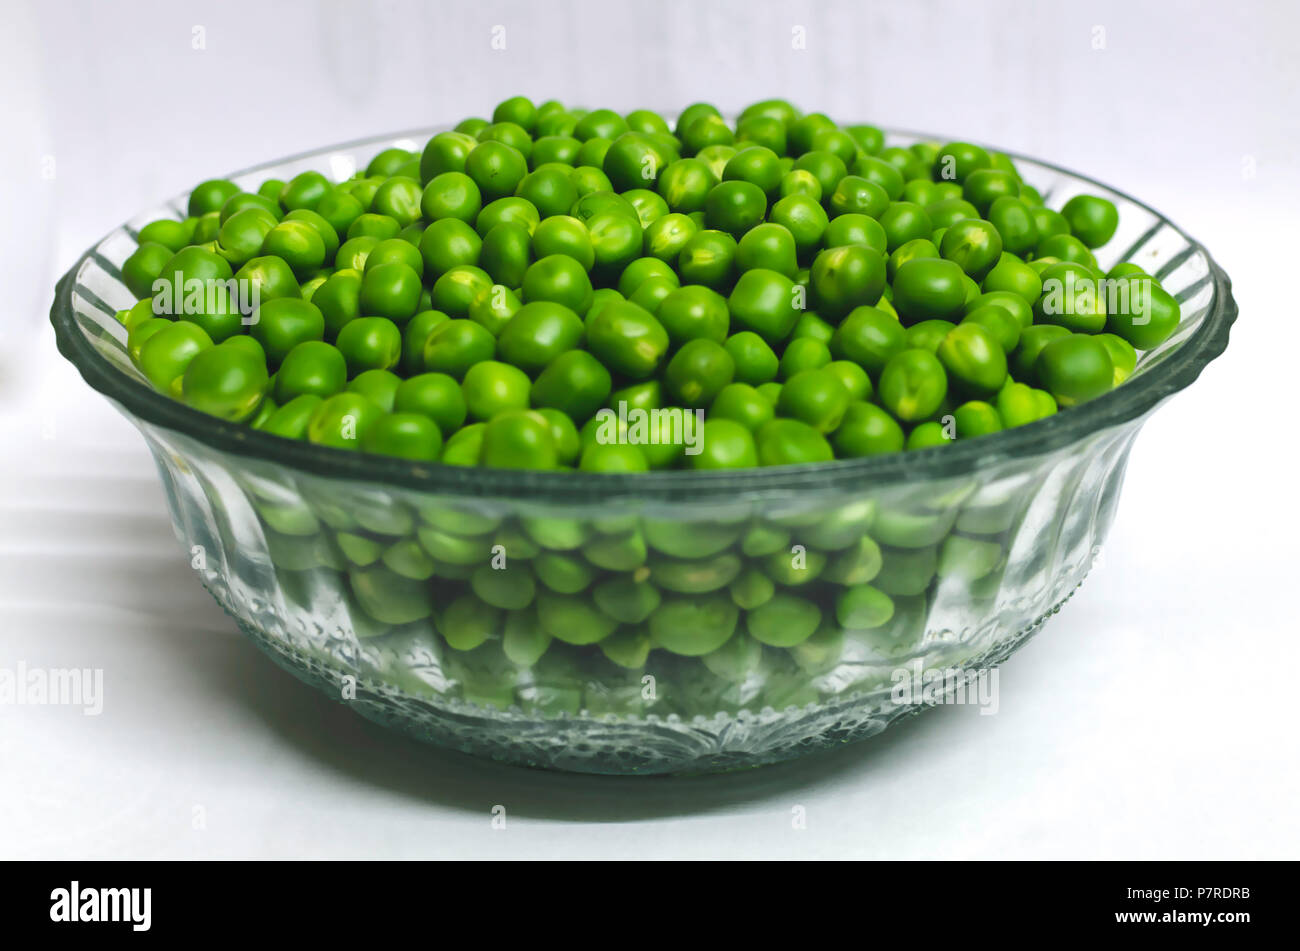 A glass bowl full of Green peas Stock Photo